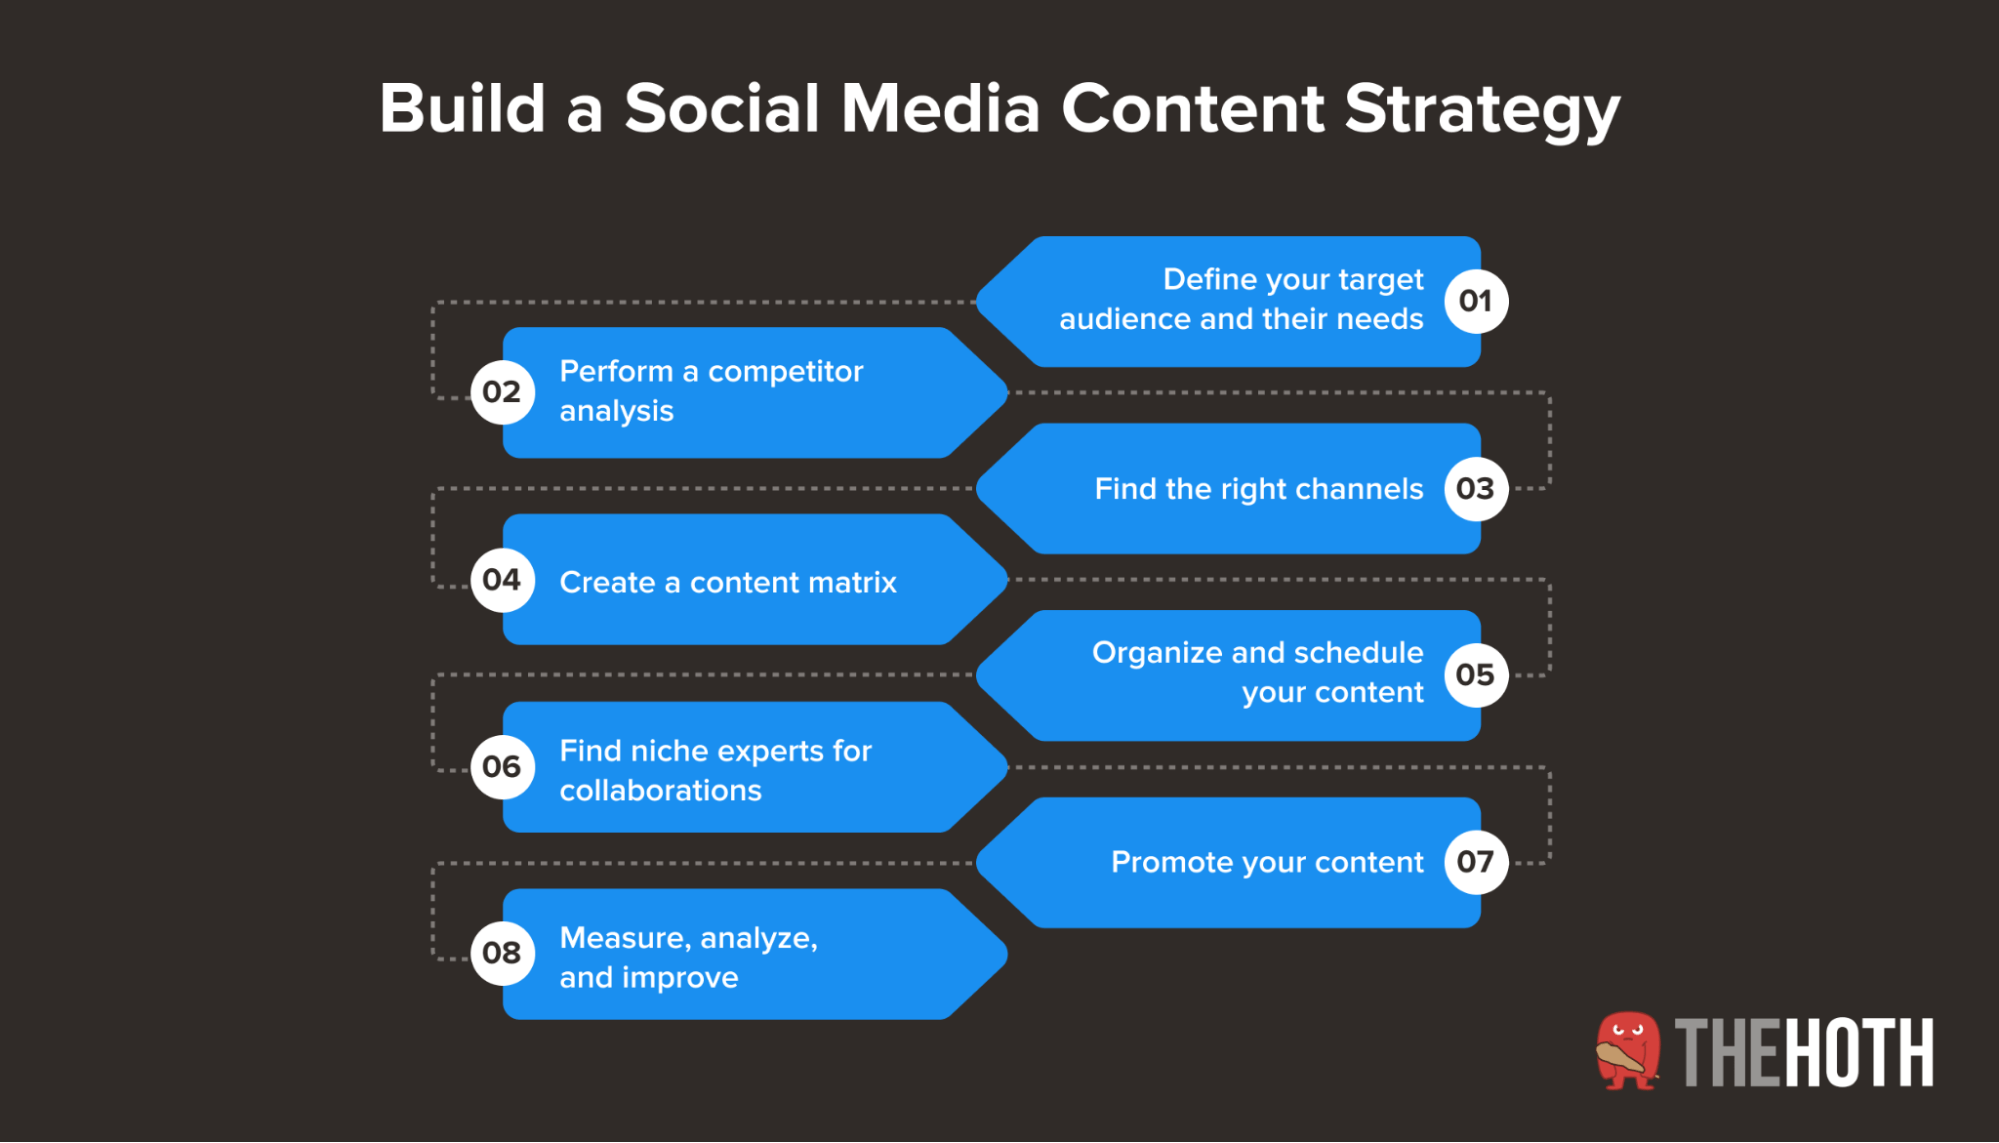 Steps of building a content strategy